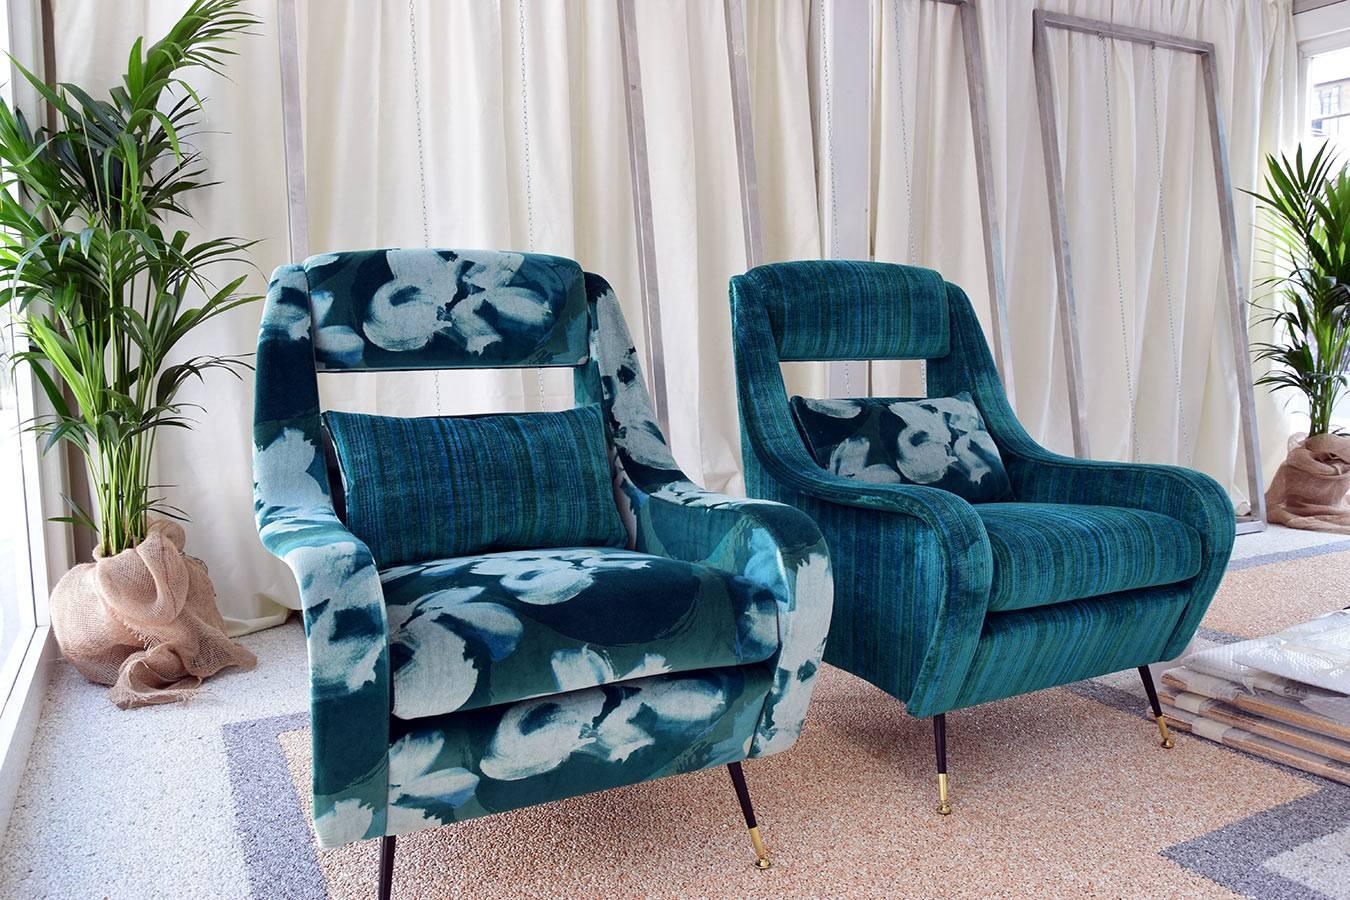 Inspired to 1950s and 1960s Italian design these armchairs have been re-designed in a contemporary style.
Thanks to its great comfort and small dimensions, Anita armchairs fit perfectly your living room, ensuring the Italian high-quality